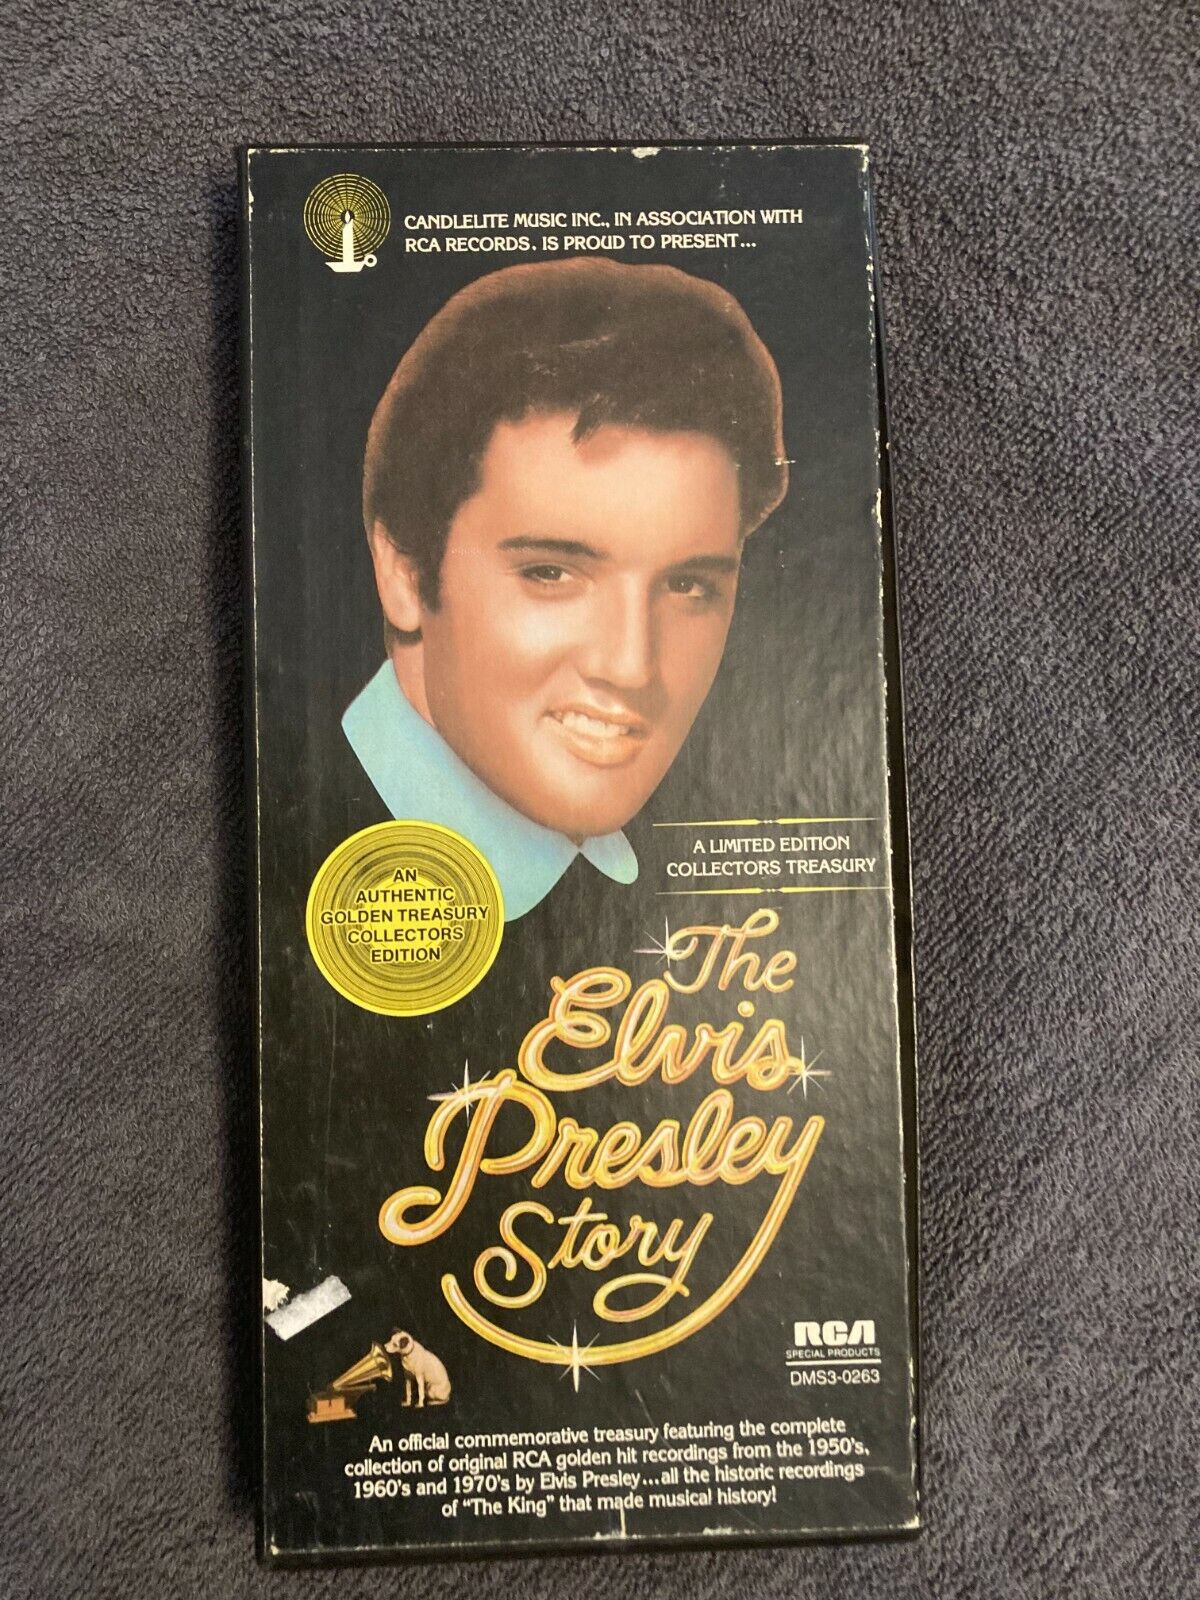 The Elvis Presley Story 8 Track Music Set in Original Box 1977 Three Track Tapes